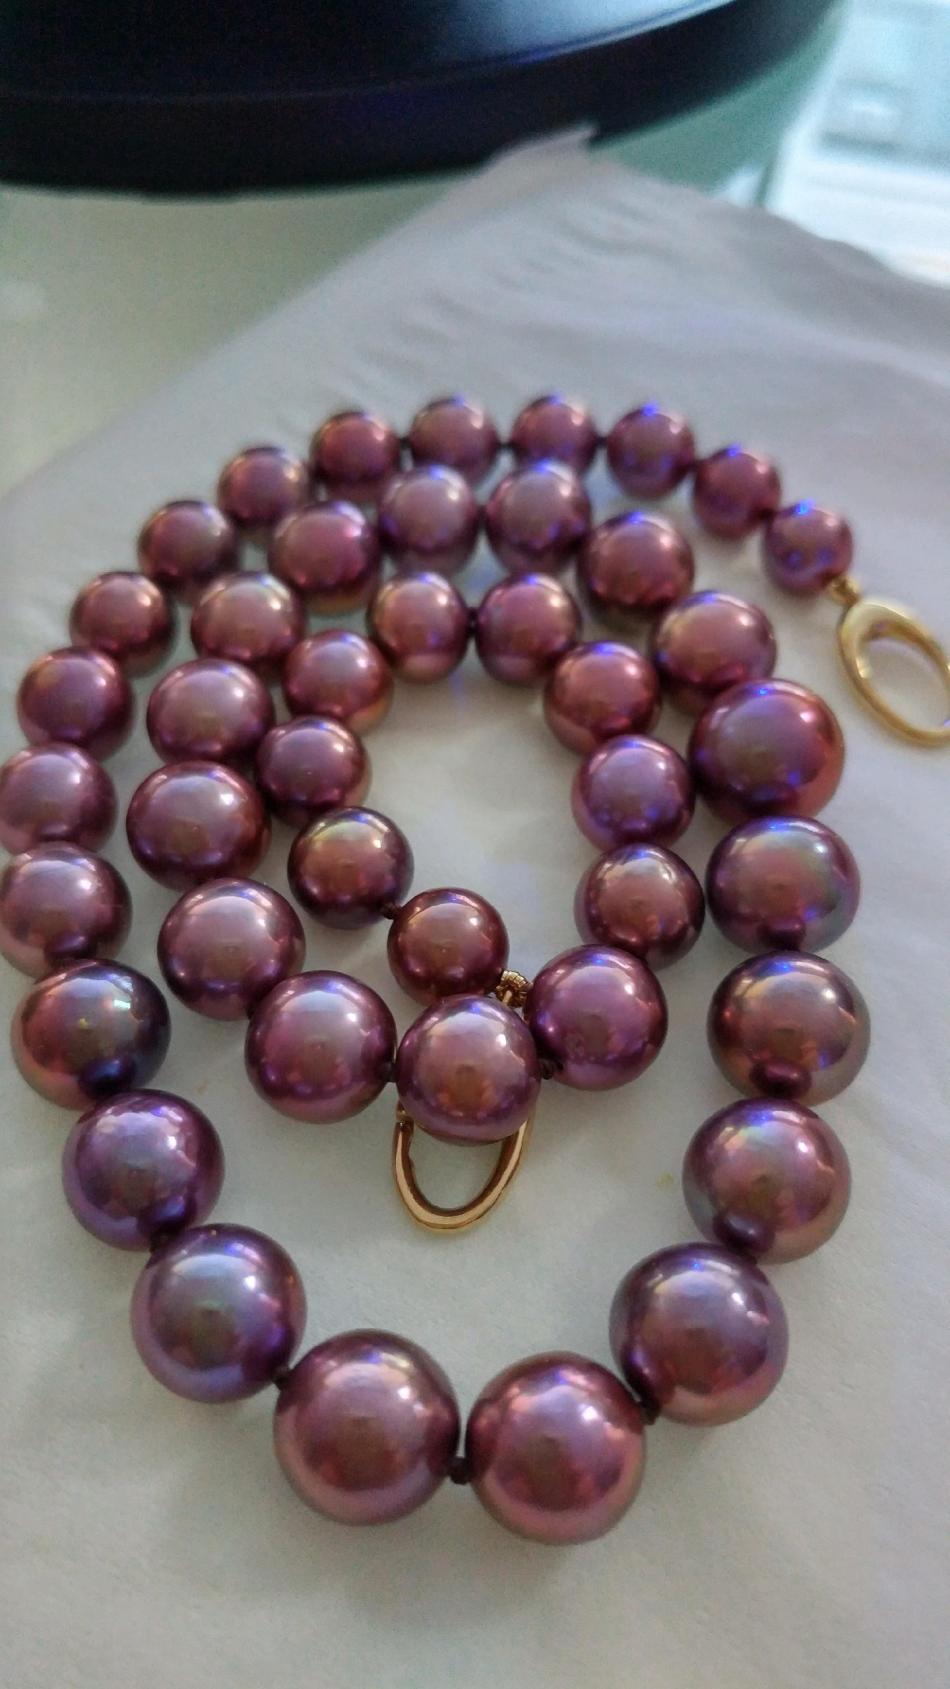 Natural color edison pearl necklace from Pearl Paradise